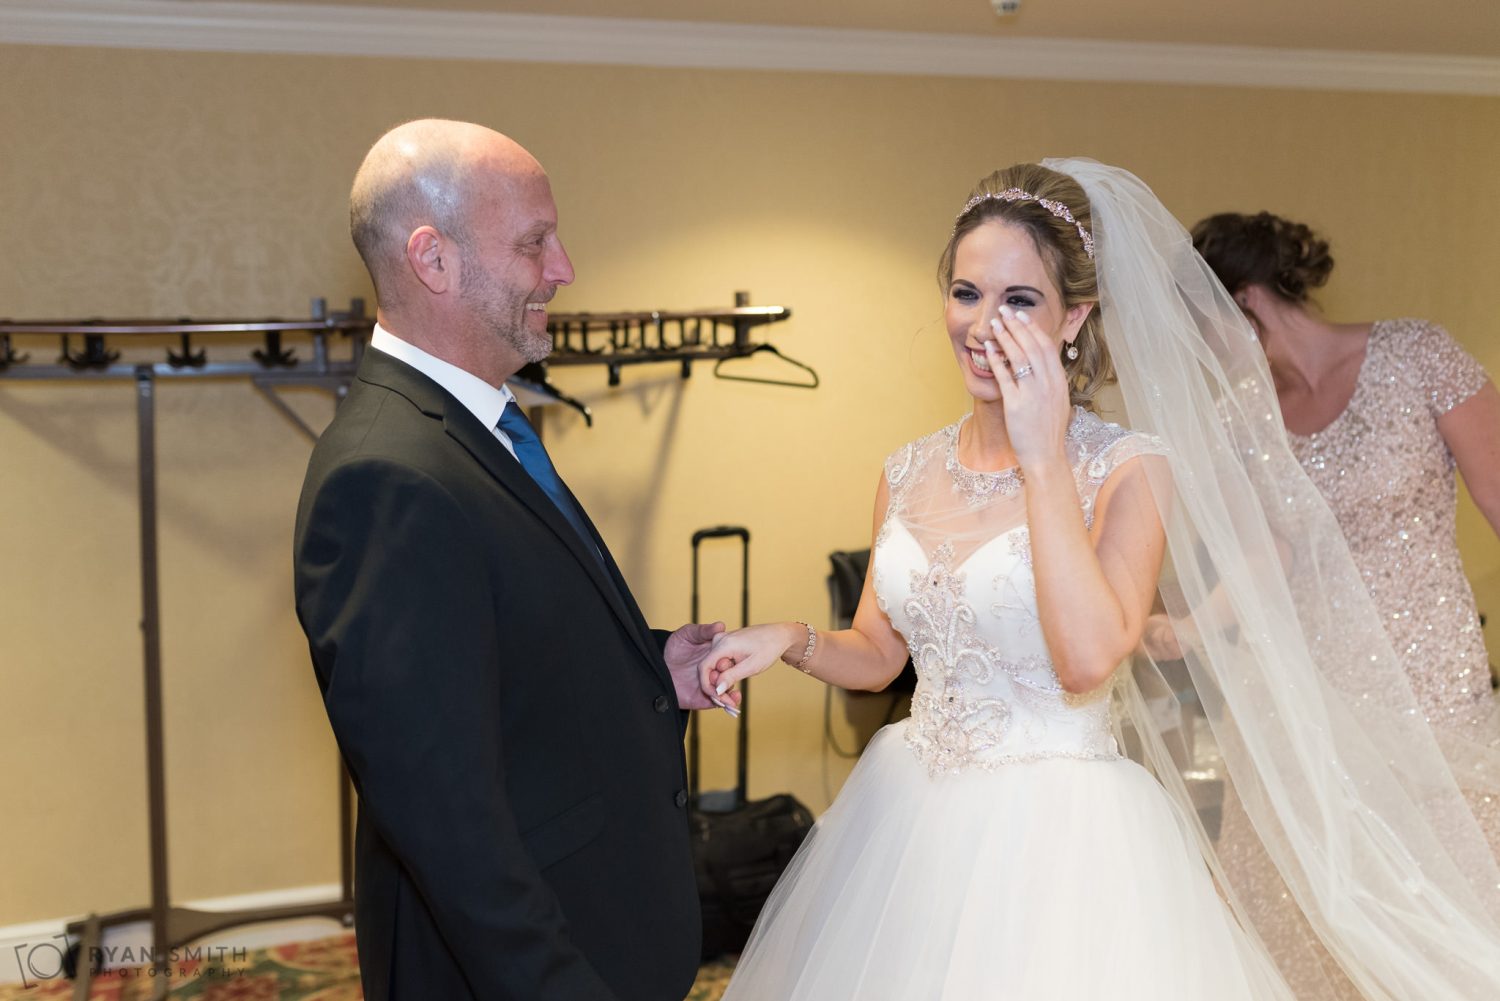 Tearful first look with dad Hilton Myrtle Beach Resort